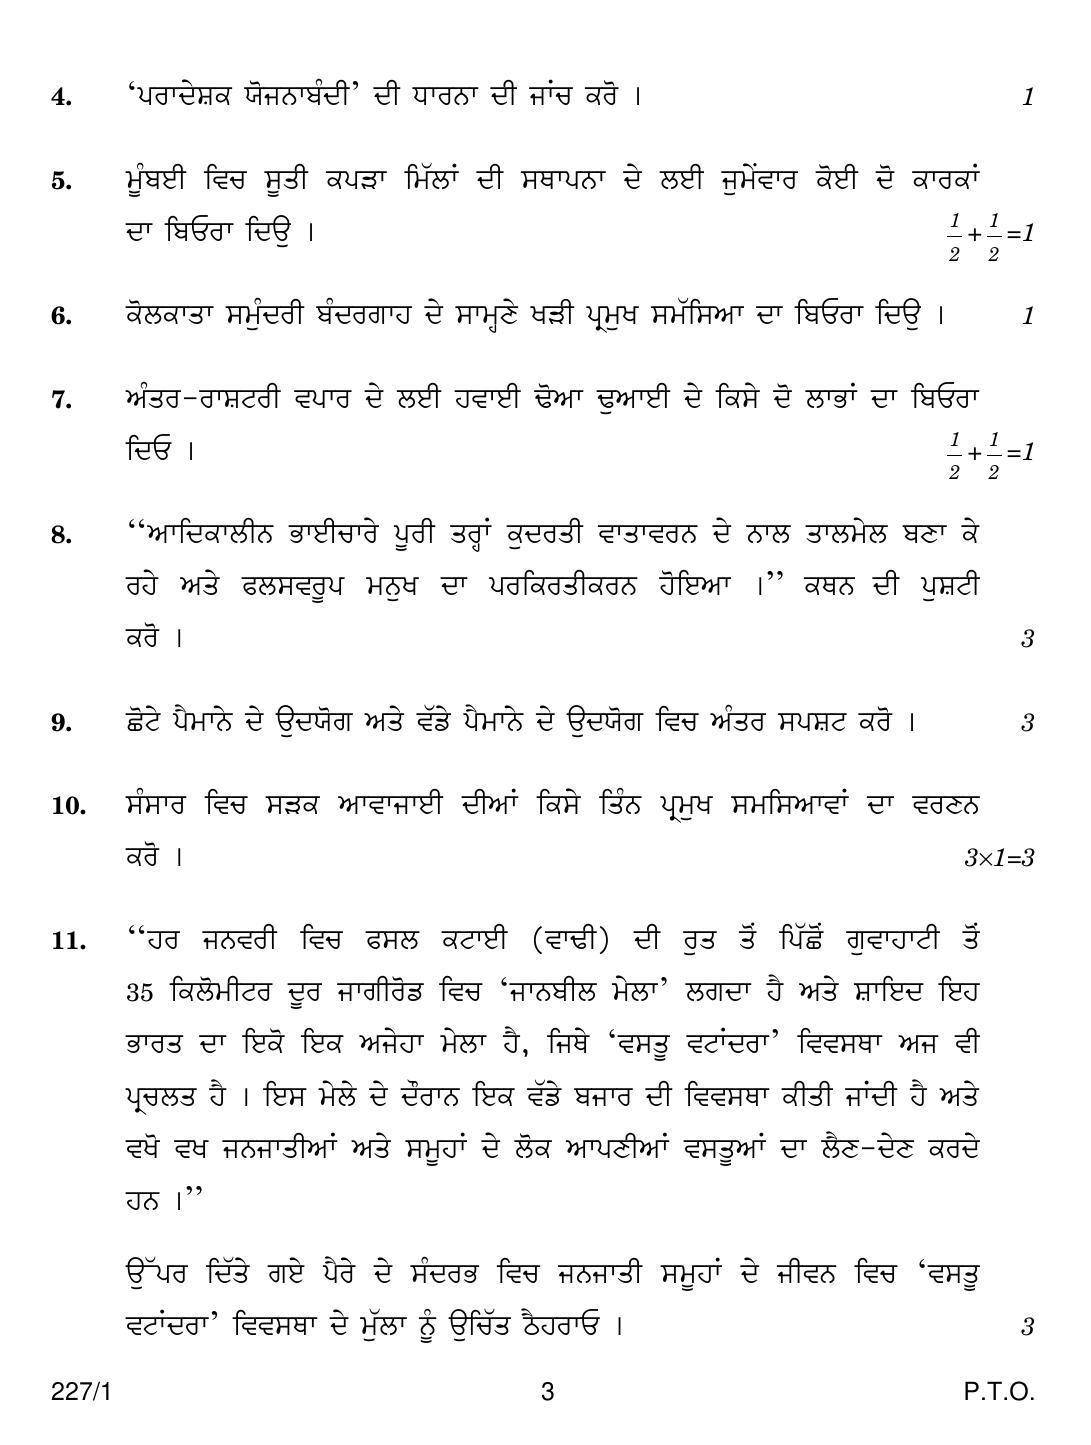 CBSE Class 12 227-1 GEOGRAPHY PUNJABI VERSION 2018 Question Paper - Page 3